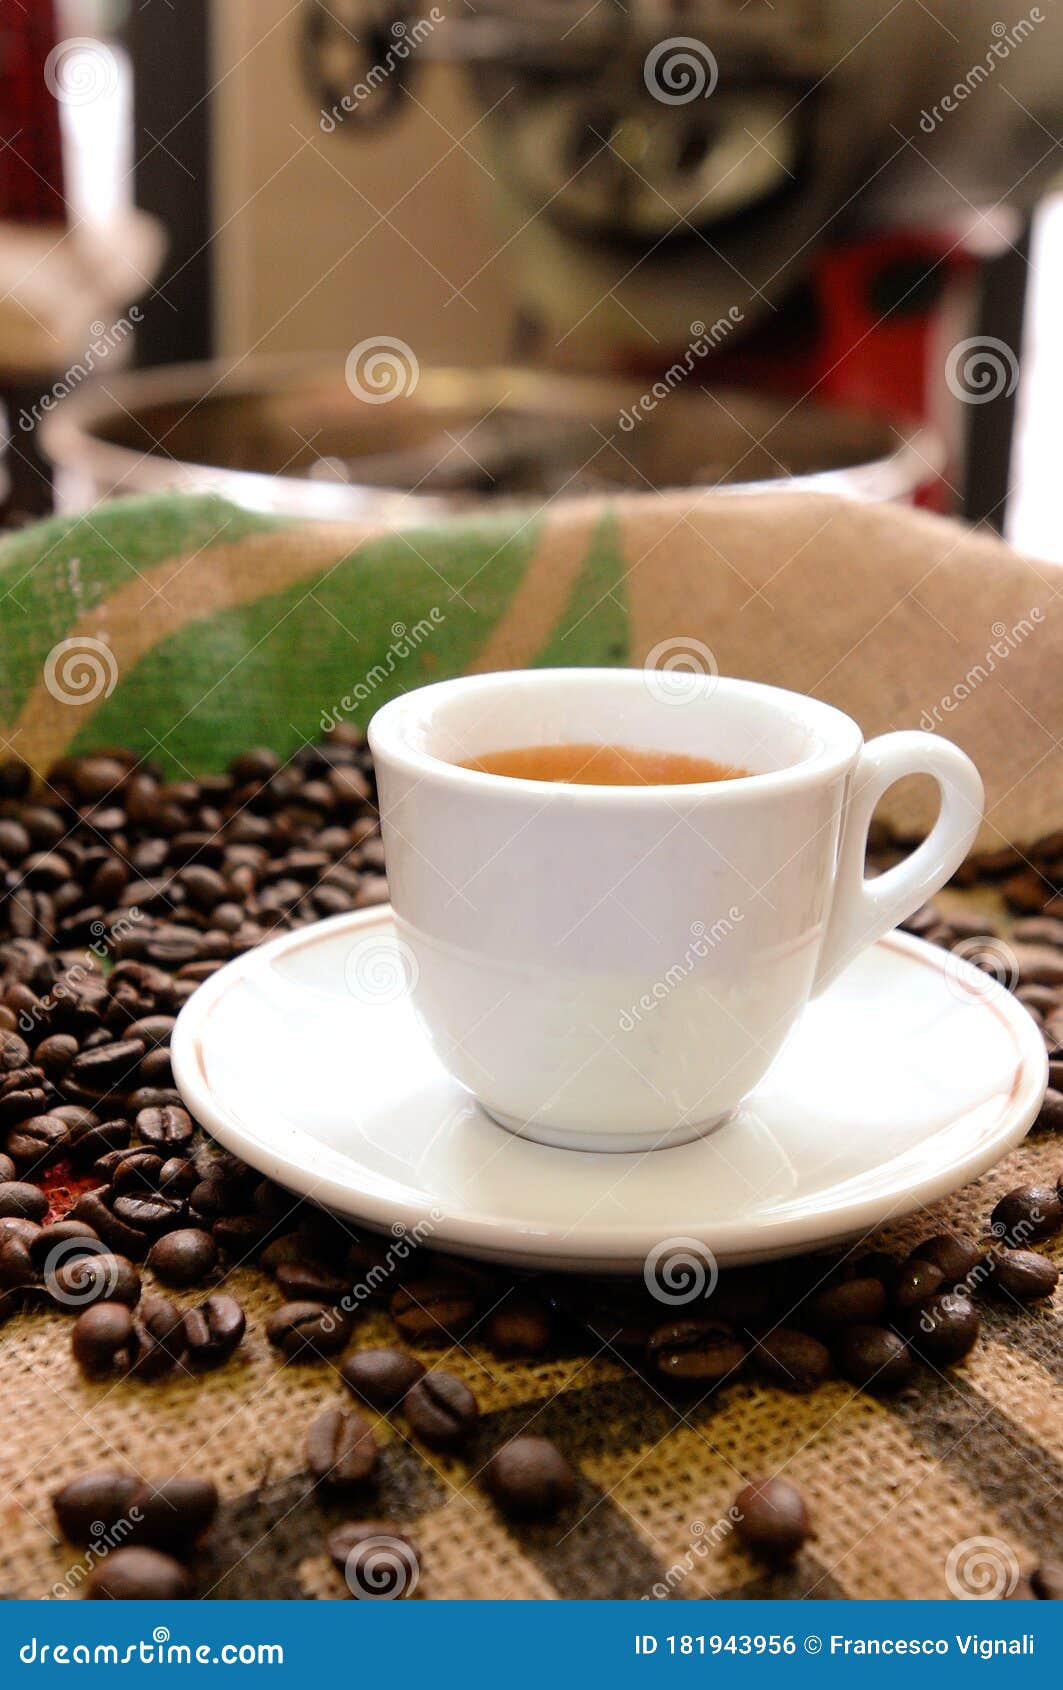 espresso cup with coffee beans in a coffee roasting